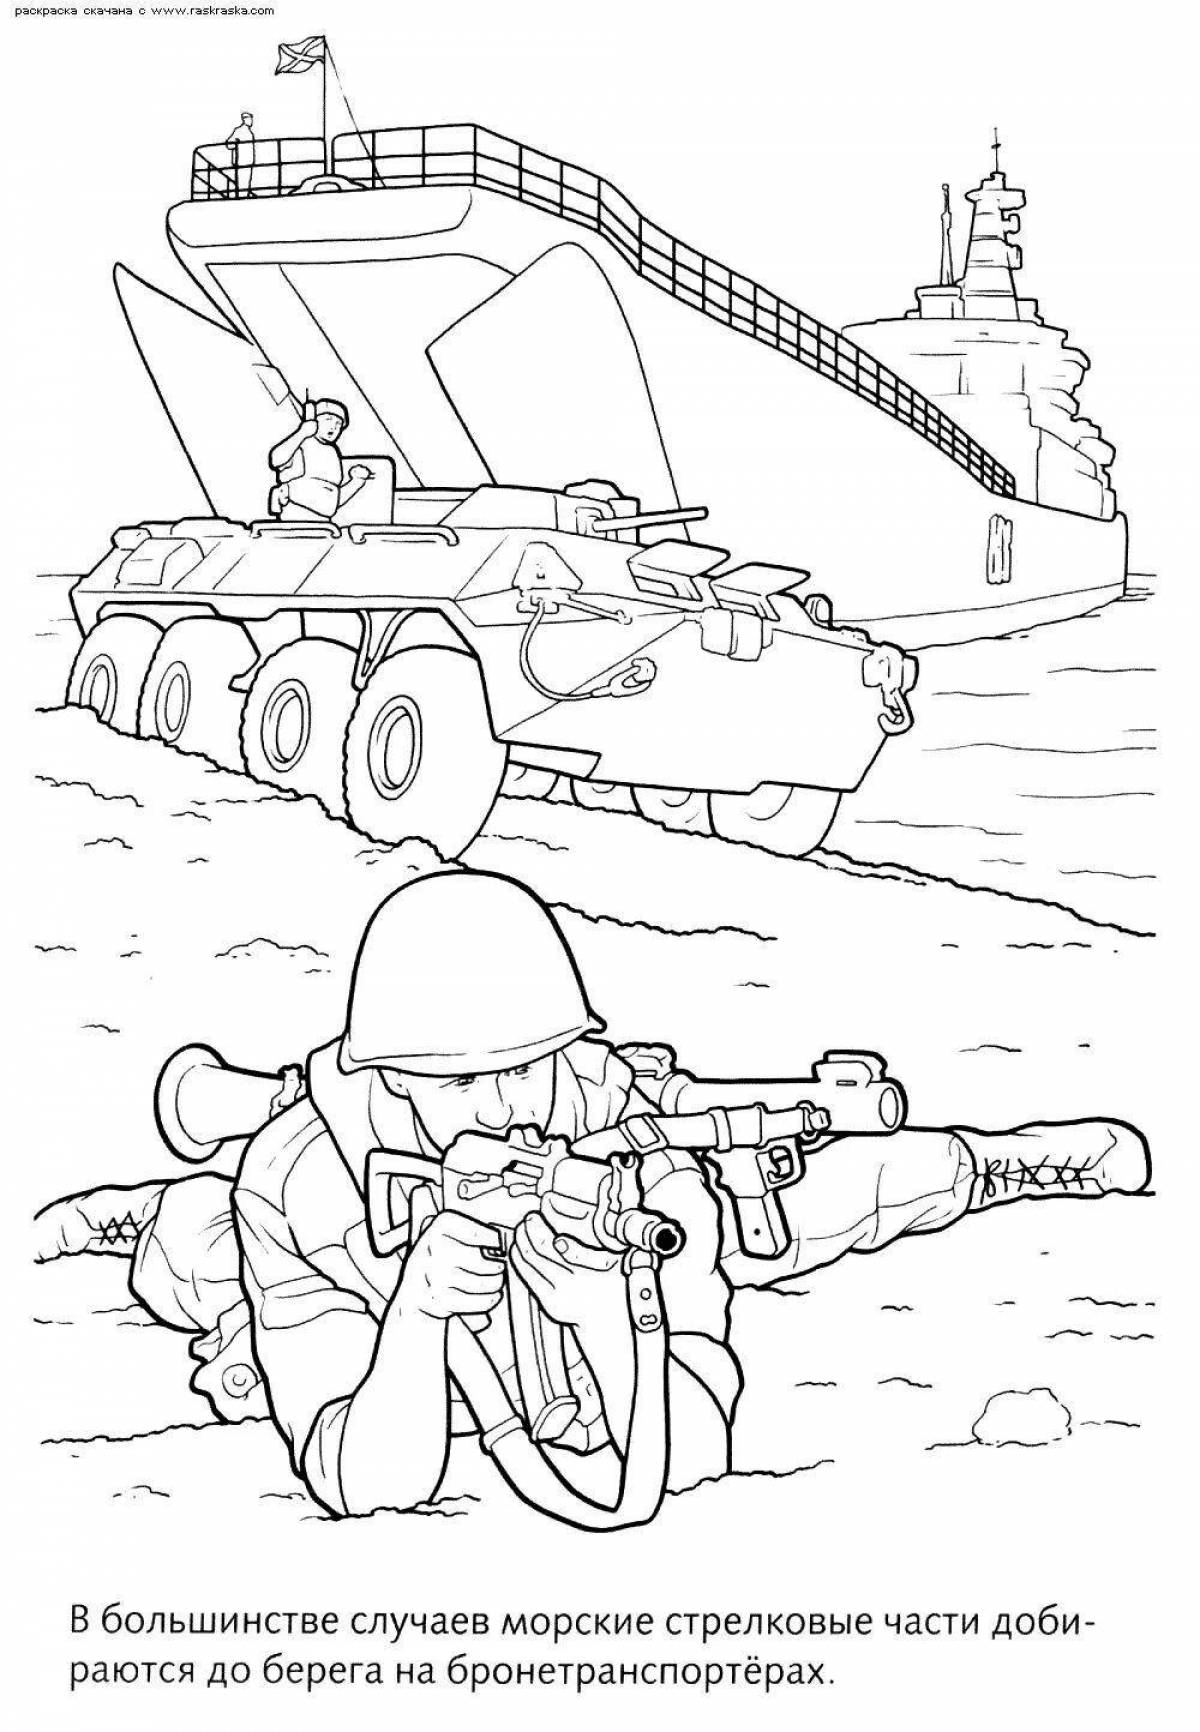 Coloring pages soldiers of different branches of the military for children